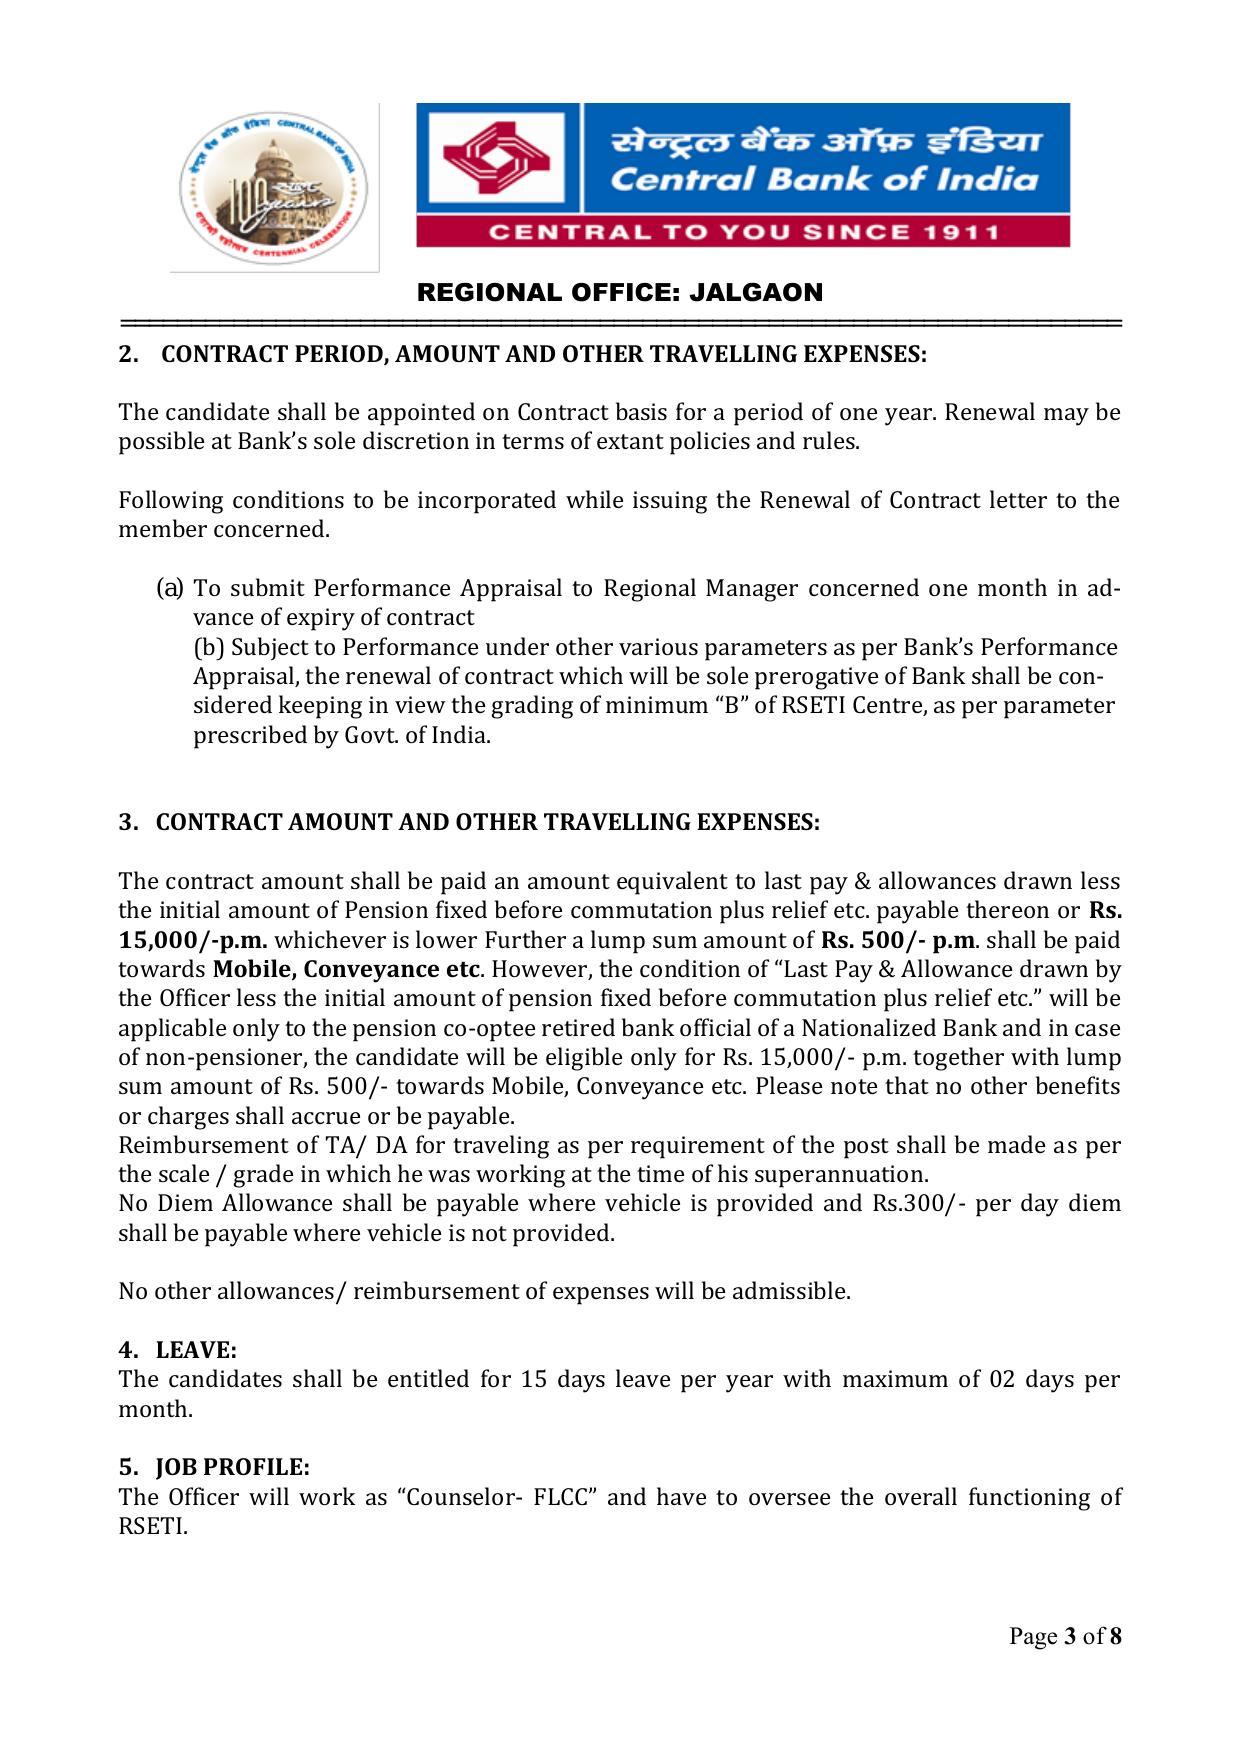 Central Bank of India Jalgaon Invites Application for FLCC Counselor Recruitment 2023 - Page 3